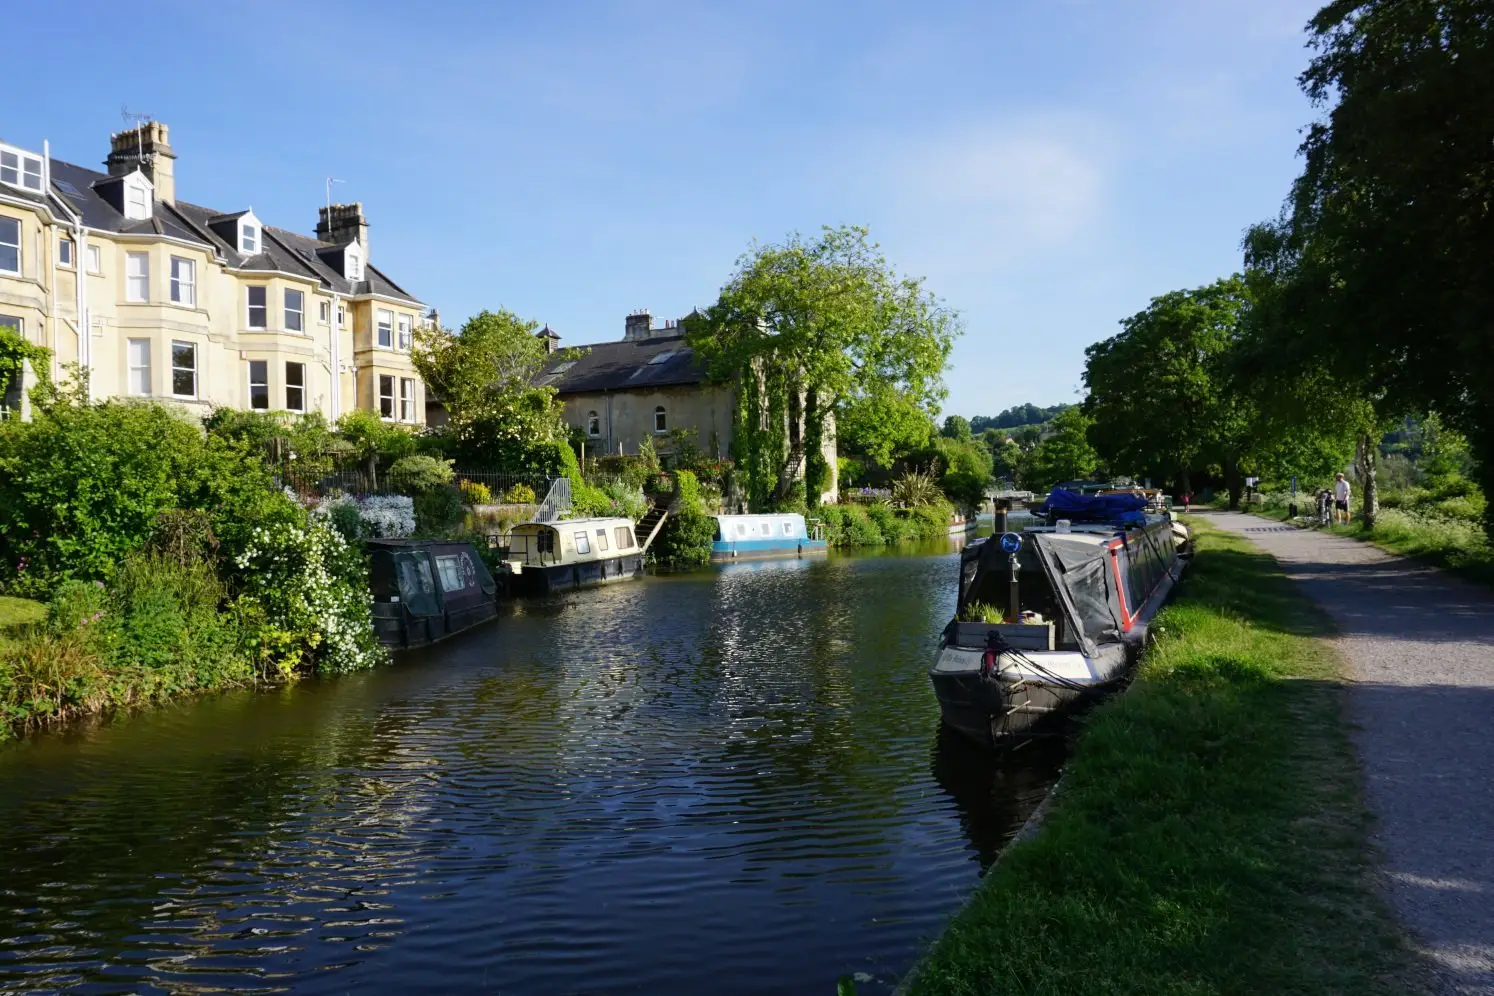 Kennet & Avon canal with canal boats and townhouses, one of Bath's hidden gems